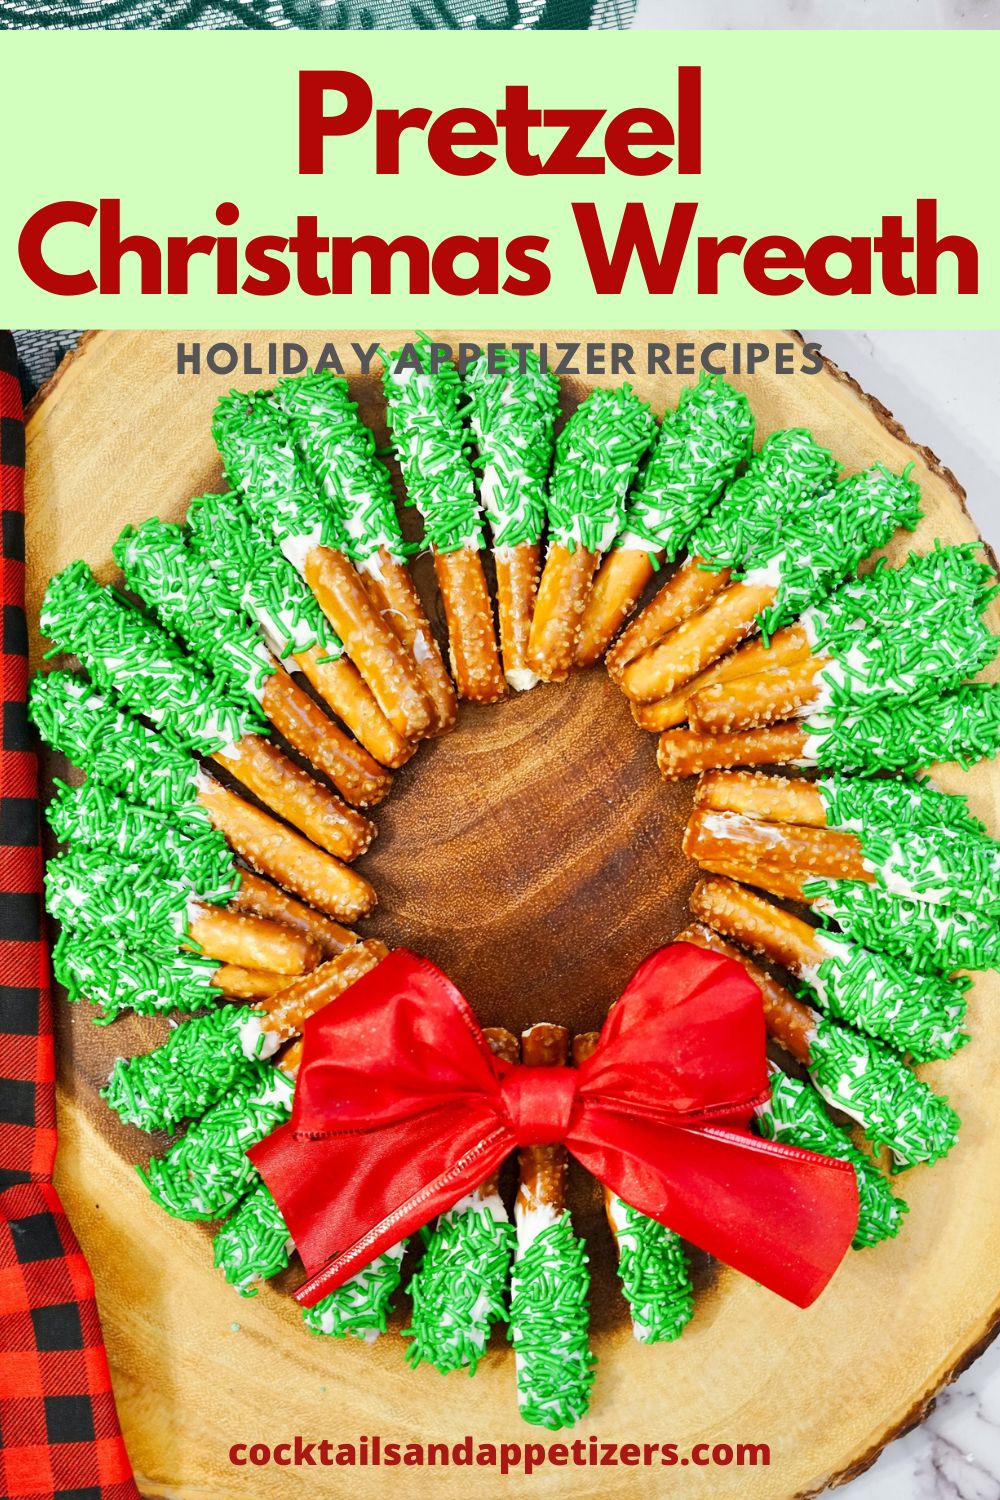 Pretzel wreath with white frosting and green sprinkles and a red bow on a table.